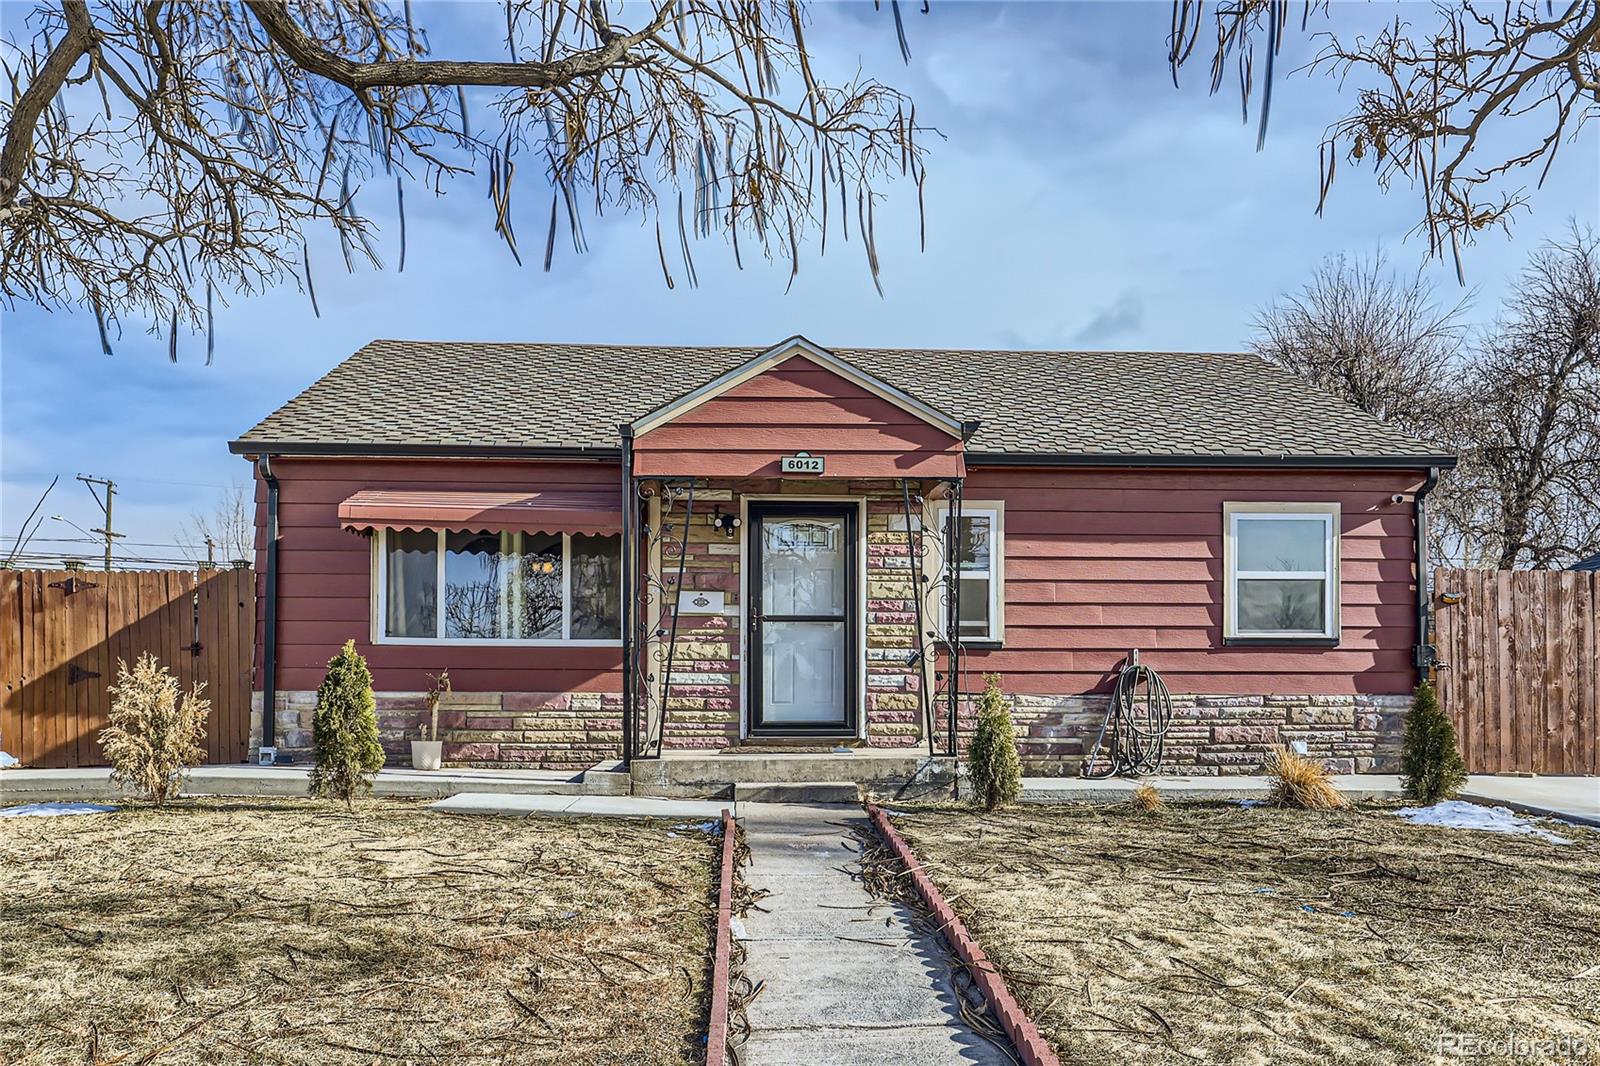 Report Image for 6012  Hudson Street,Commerce City, Colorado